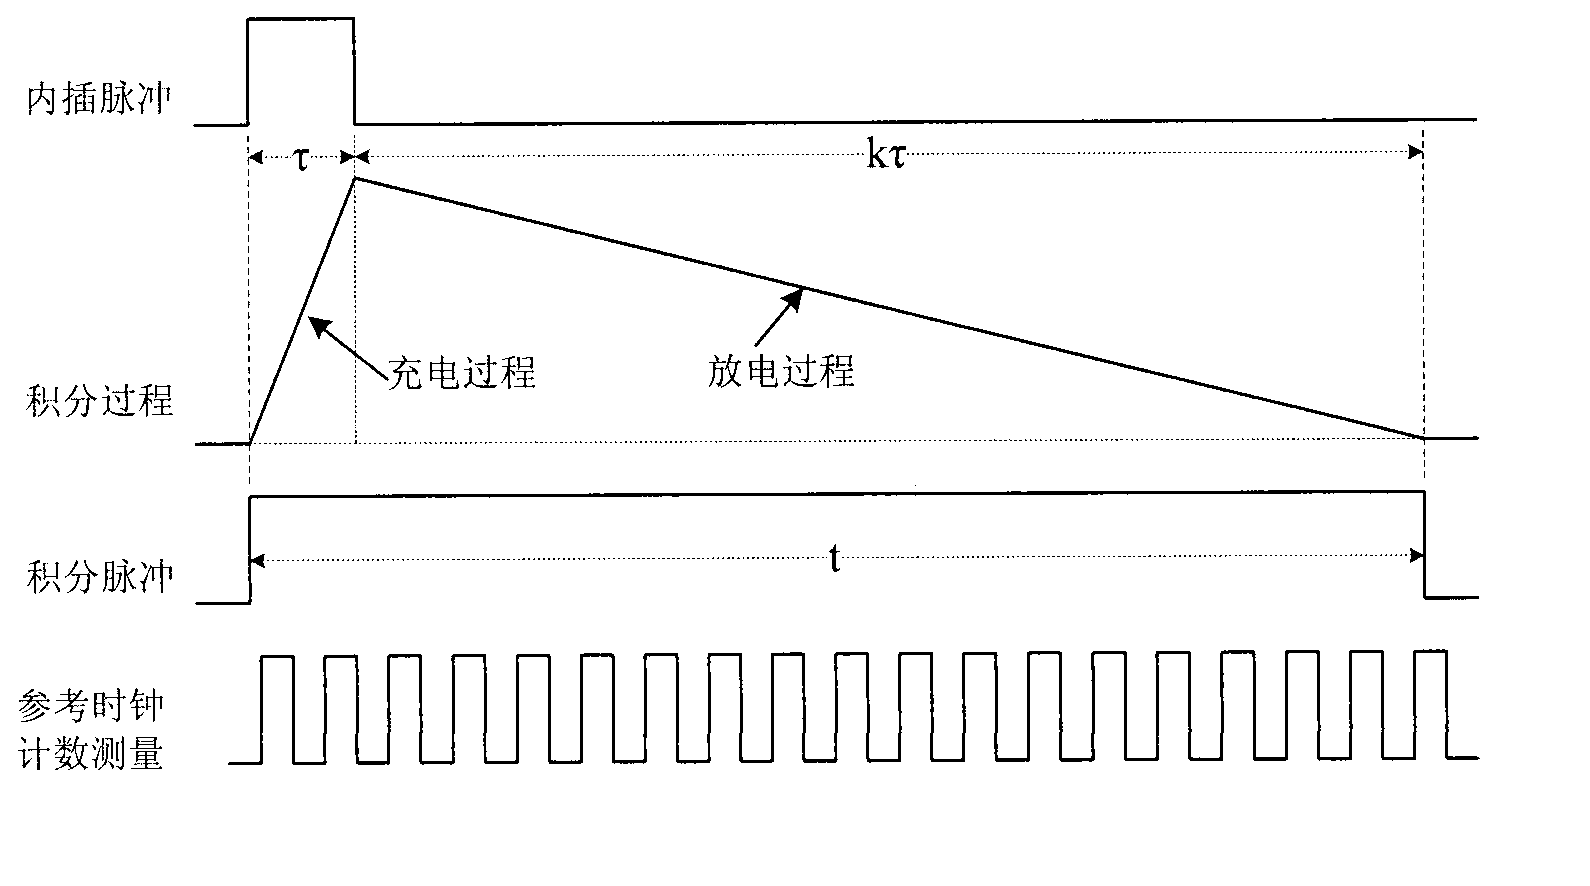 High-precision phase and frequence measuring system